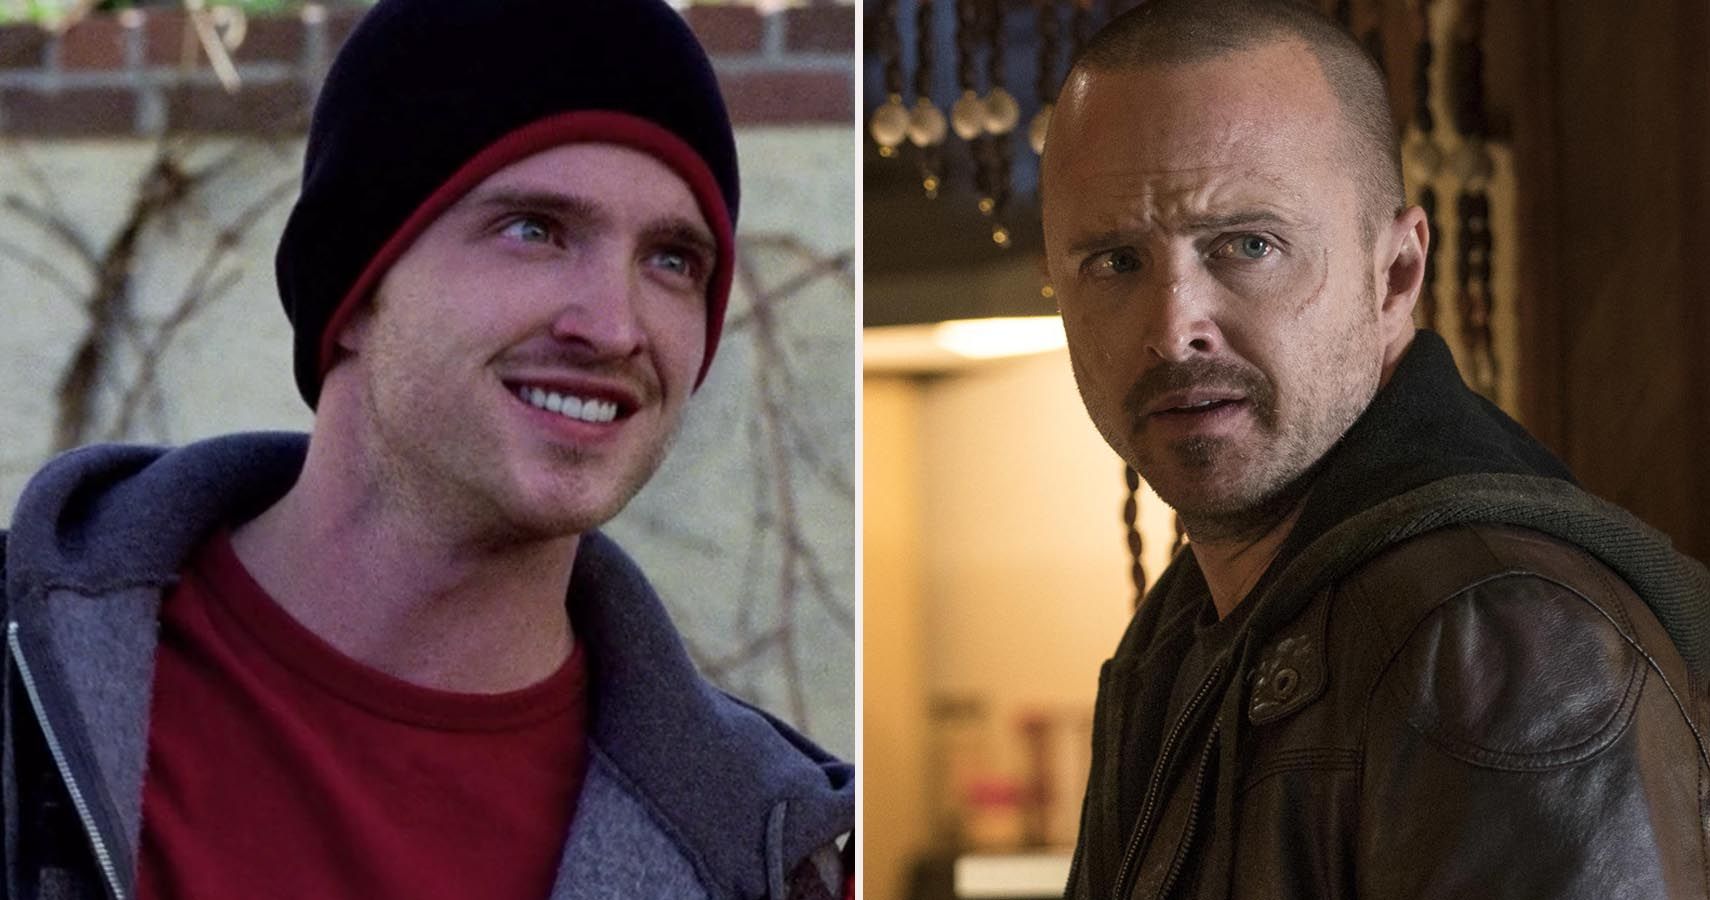 Breaking Bad: 10 Life Lessons We Can Learn From Jesse Pinkman.